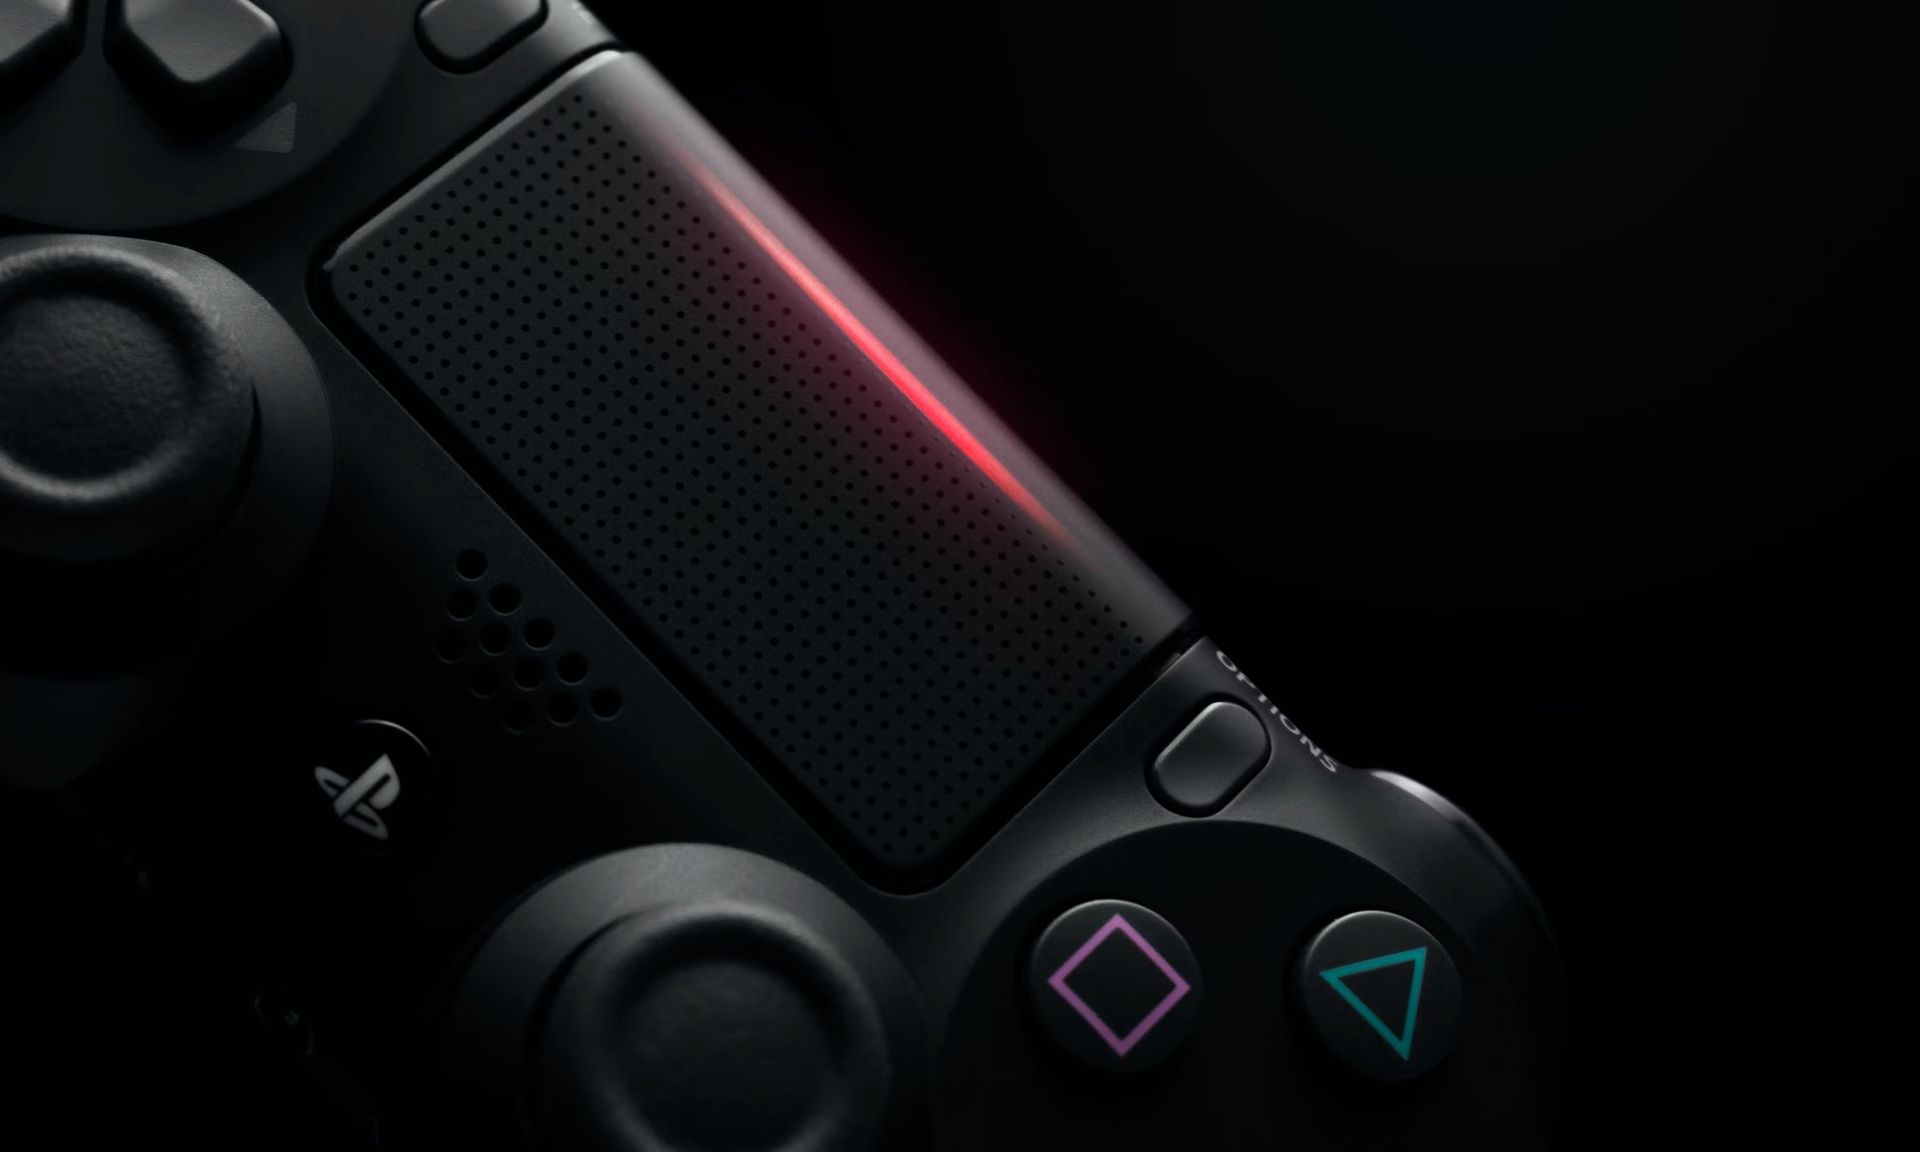 We've gathered every information we could find about PlayStation State of Play June 2022 event, let's review trailers and highlights together.